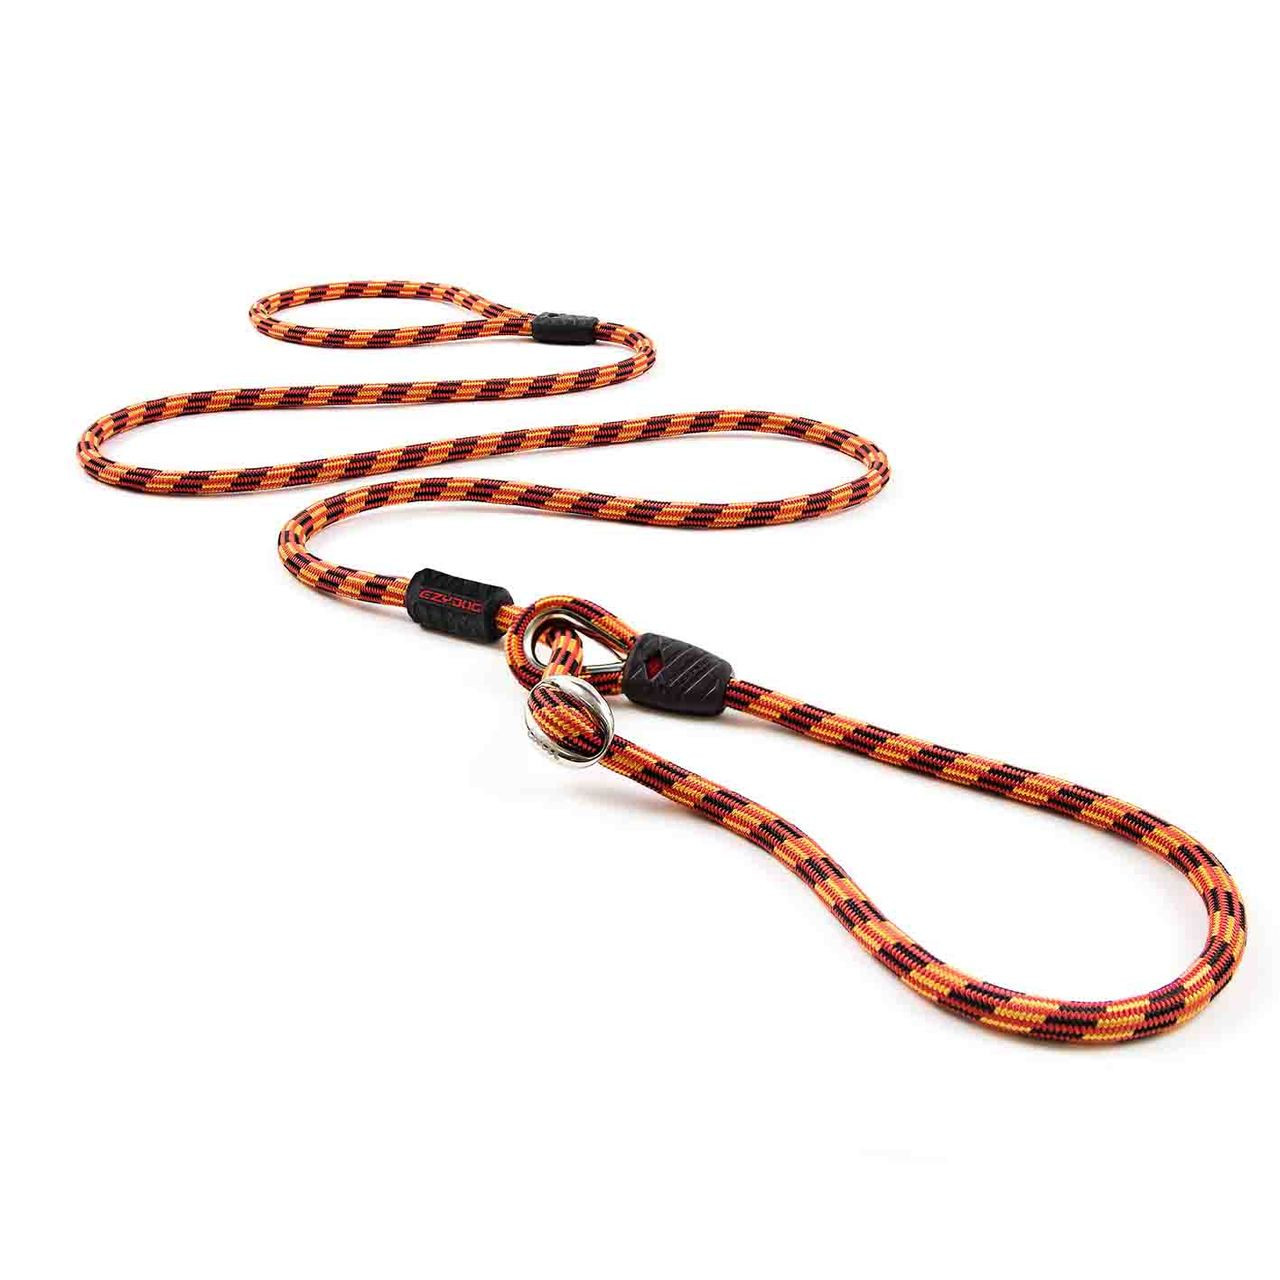 Rope Dog Leash | Slip Leash for Dogs